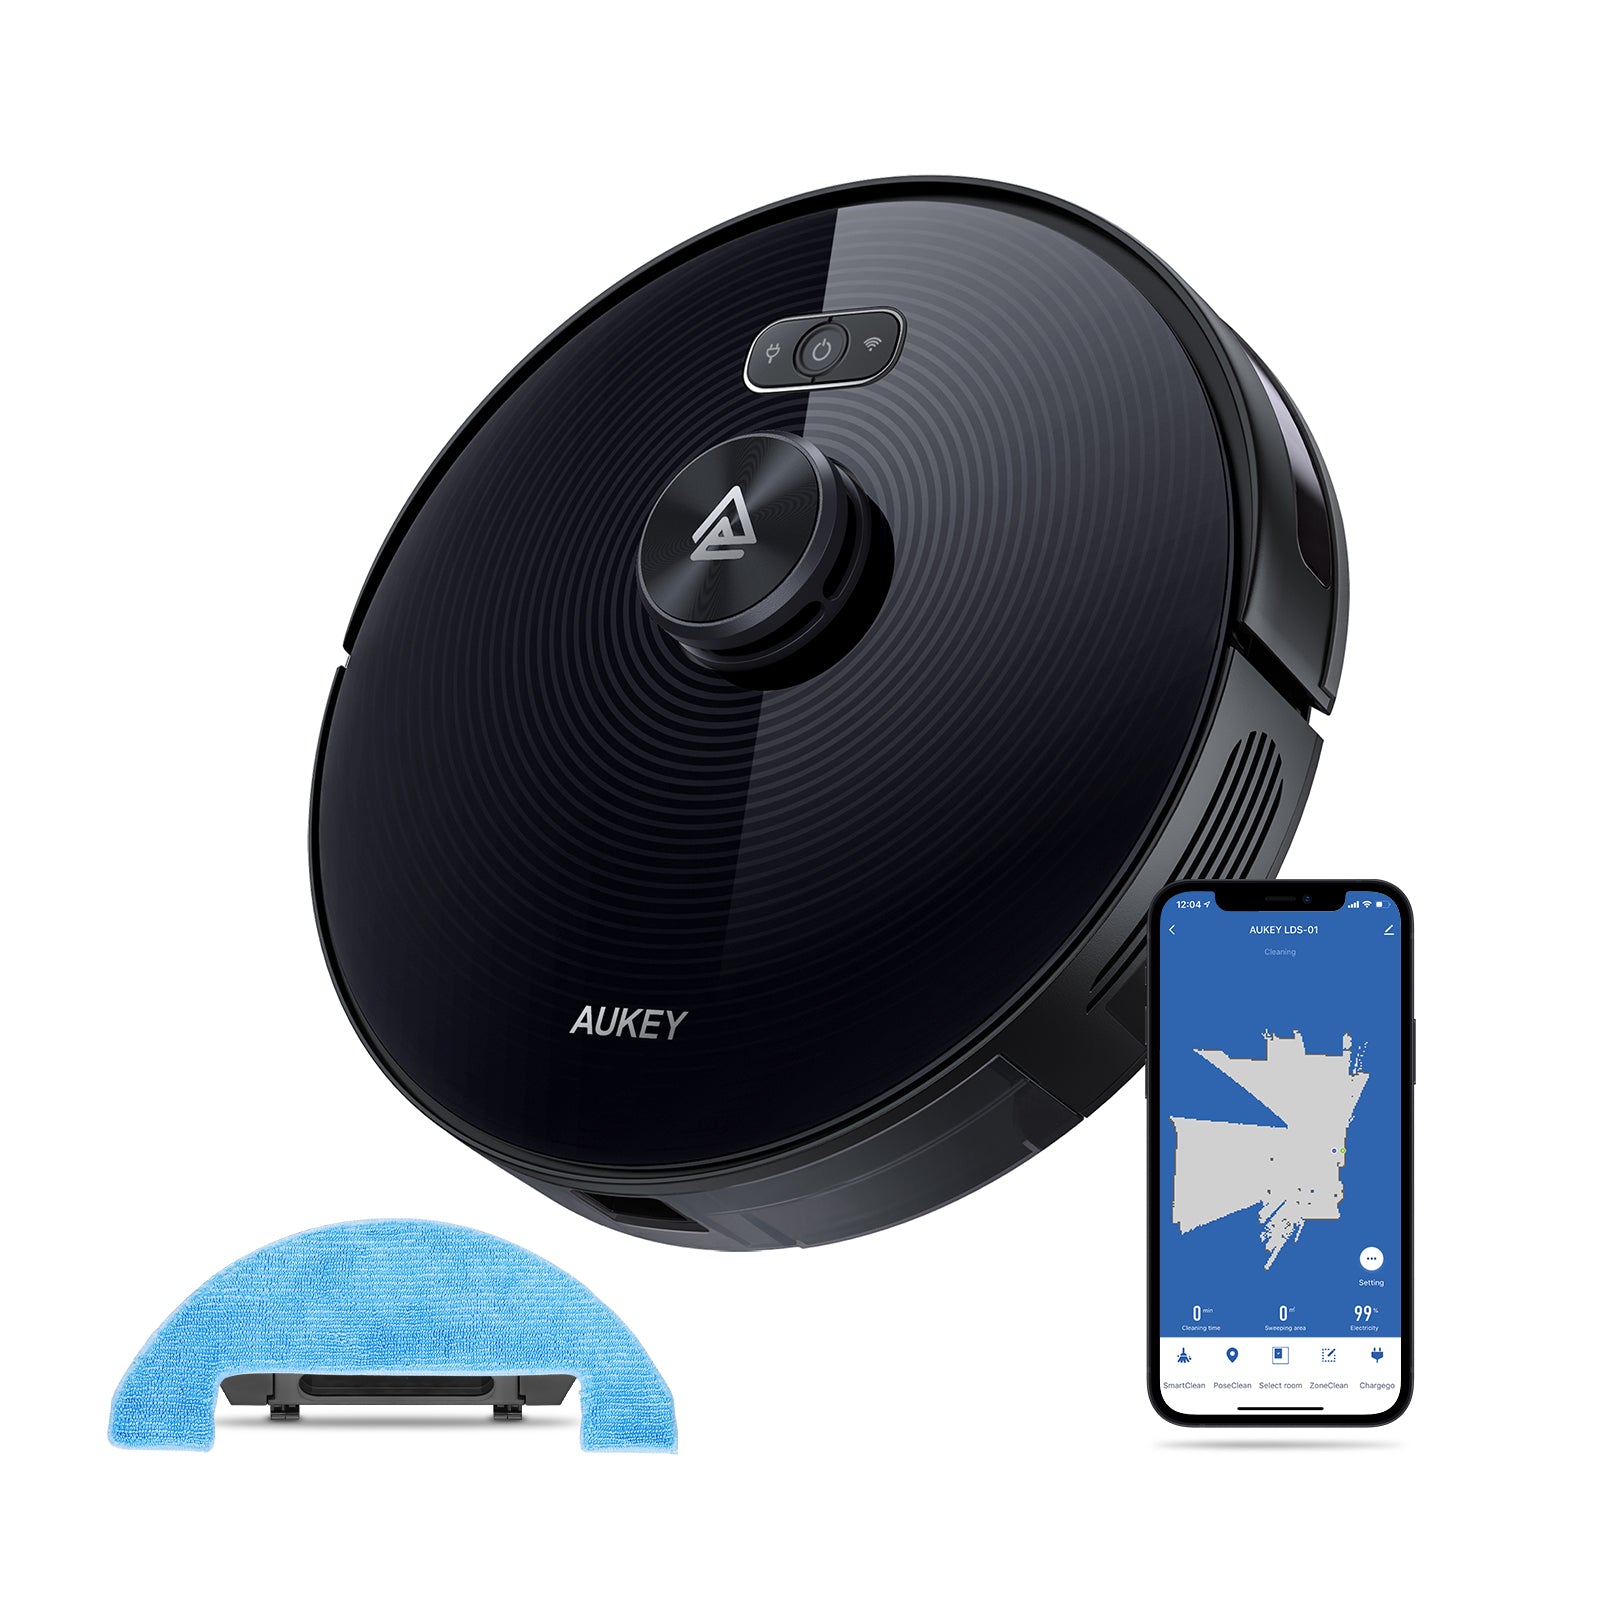 LDS-01 Robot Vacuum Cleaner, Wi-Fi, Upgraded, Strong Suction, Self-Charging Robotic Vacuum, Cleans Hard Floors